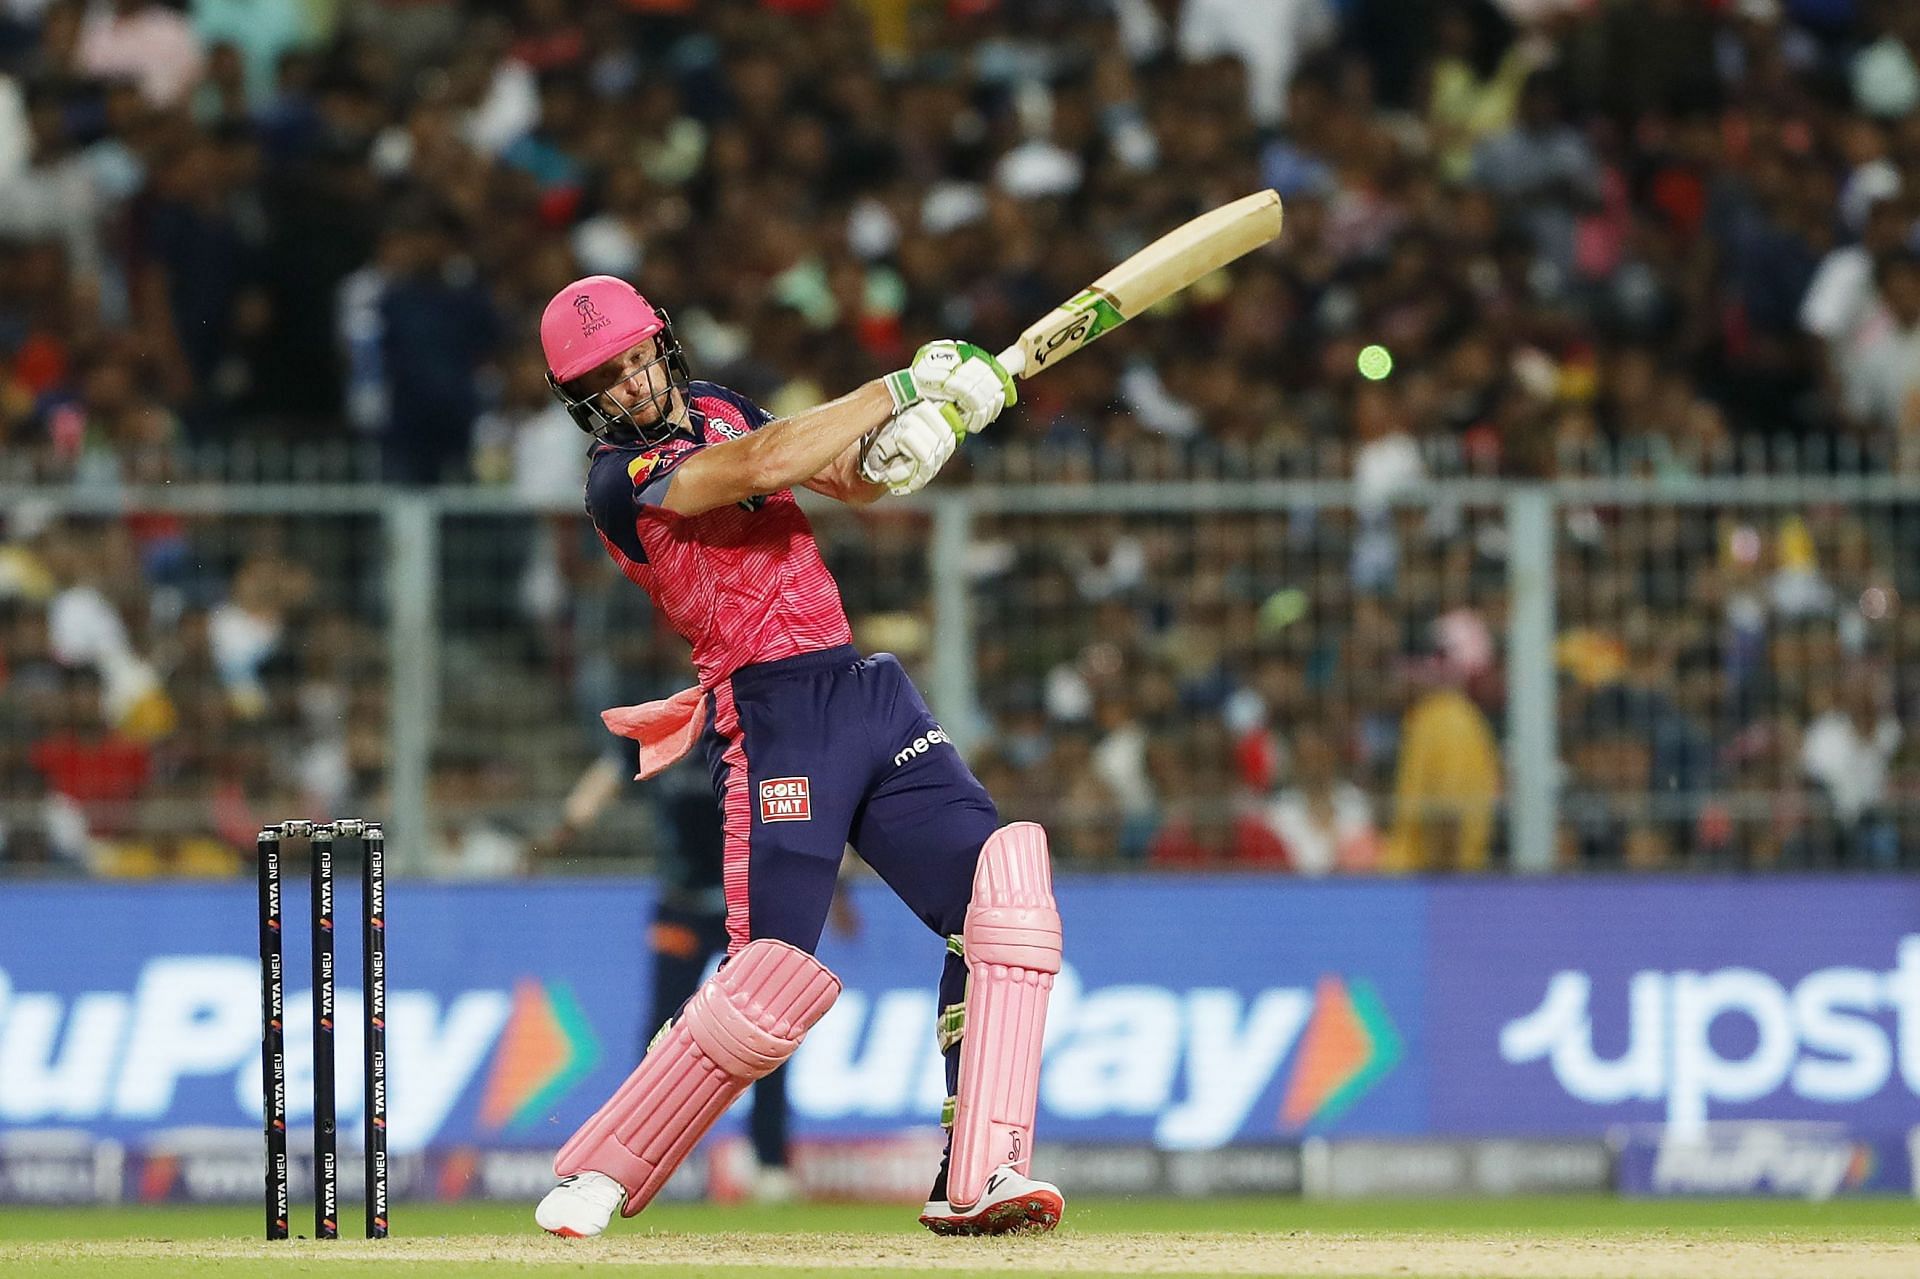 Jos Buttler has amassed 718 runs at an average of 51.29 so far in this tournament [Credits: IPL]